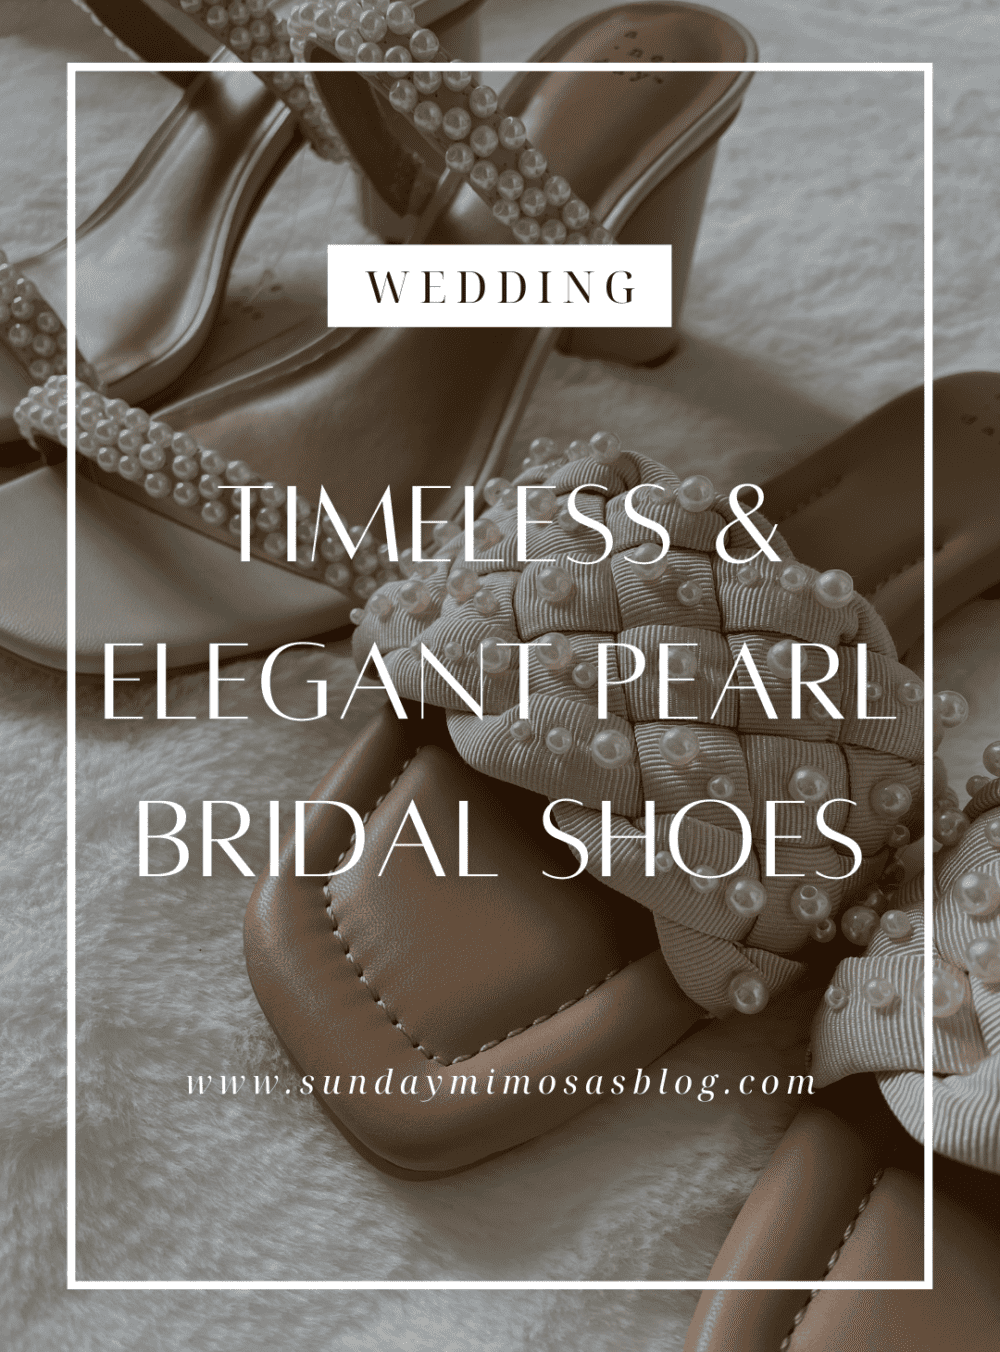 Timeless Pearl Bridal Shoes every Bride will Love - Sunday Mimosas